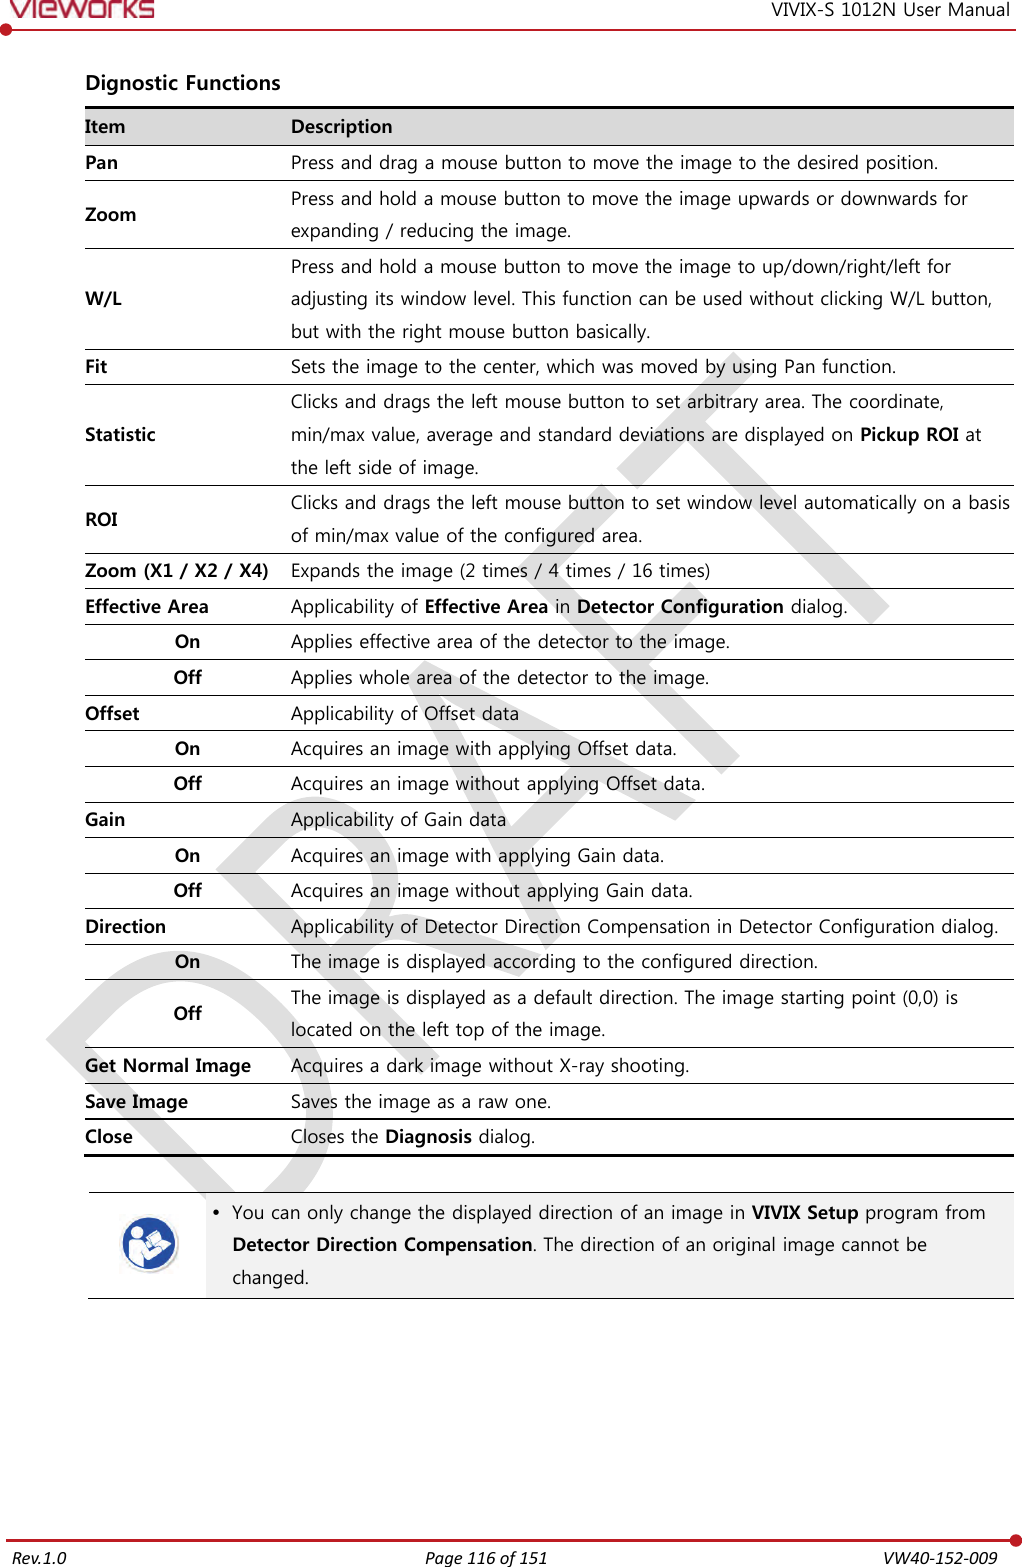   Rev.1.0 Page 116 of 151  VW40-152-009 VIVIX-S 1012N User Manual  Dignostic Functions Item Description Pan Press and drag a mouse button to move the image to the desired position. Zoom Press and hold a mouse button to move the image upwards or downwards for expanding / reducing the image. W/L Press and hold a mouse button to move the image to up/down/right/left for adjusting its window level. This function can be used without clicking W/L button, but with the right mouse button basically. Fit Sets the image to the center, which was moved by using Pan function. Statistic Clicks and drags the left mouse button to set arbitrary area. The coordinate, min/max value, average and standard deviations are displayed on Pickup ROI at the left side of image. ROI Clicks and drags the left mouse button to set window level automatically on a basis of min/max value of the configured area. Zoom (X1 / X2 / X4) Expands the image (2 times / 4 times / 16 times) Effective Area Applicability of Effective Area in Detector Configuration dialog. On Applies effective area of the detector to the image. Off Applies whole area of the detector to the image. Offset Applicability of Offset data On Acquires an image with applying Offset data. Off Acquires an image without applying Offset data. Gain Applicability of Gain data On Acquires an image with applying Gain data. Off Acquires an image without applying Gain data. Direction Applicability of Detector Direction Compensation in Detector Configuration dialog. On The image is displayed according to the configured direction. Off The image is displayed as a default direction. The image starting point (0,0) is located on the left top of the image. Get Normal Image Acquires a dark image without X-ray shooting. Save Image Saves the image as a raw one. Close Closes the Diagnosis dialog.    You can only change the displayed direction of an image in VIVIX Setup program from Detector Direction Compensation. The direction of an original image cannot be changed.   